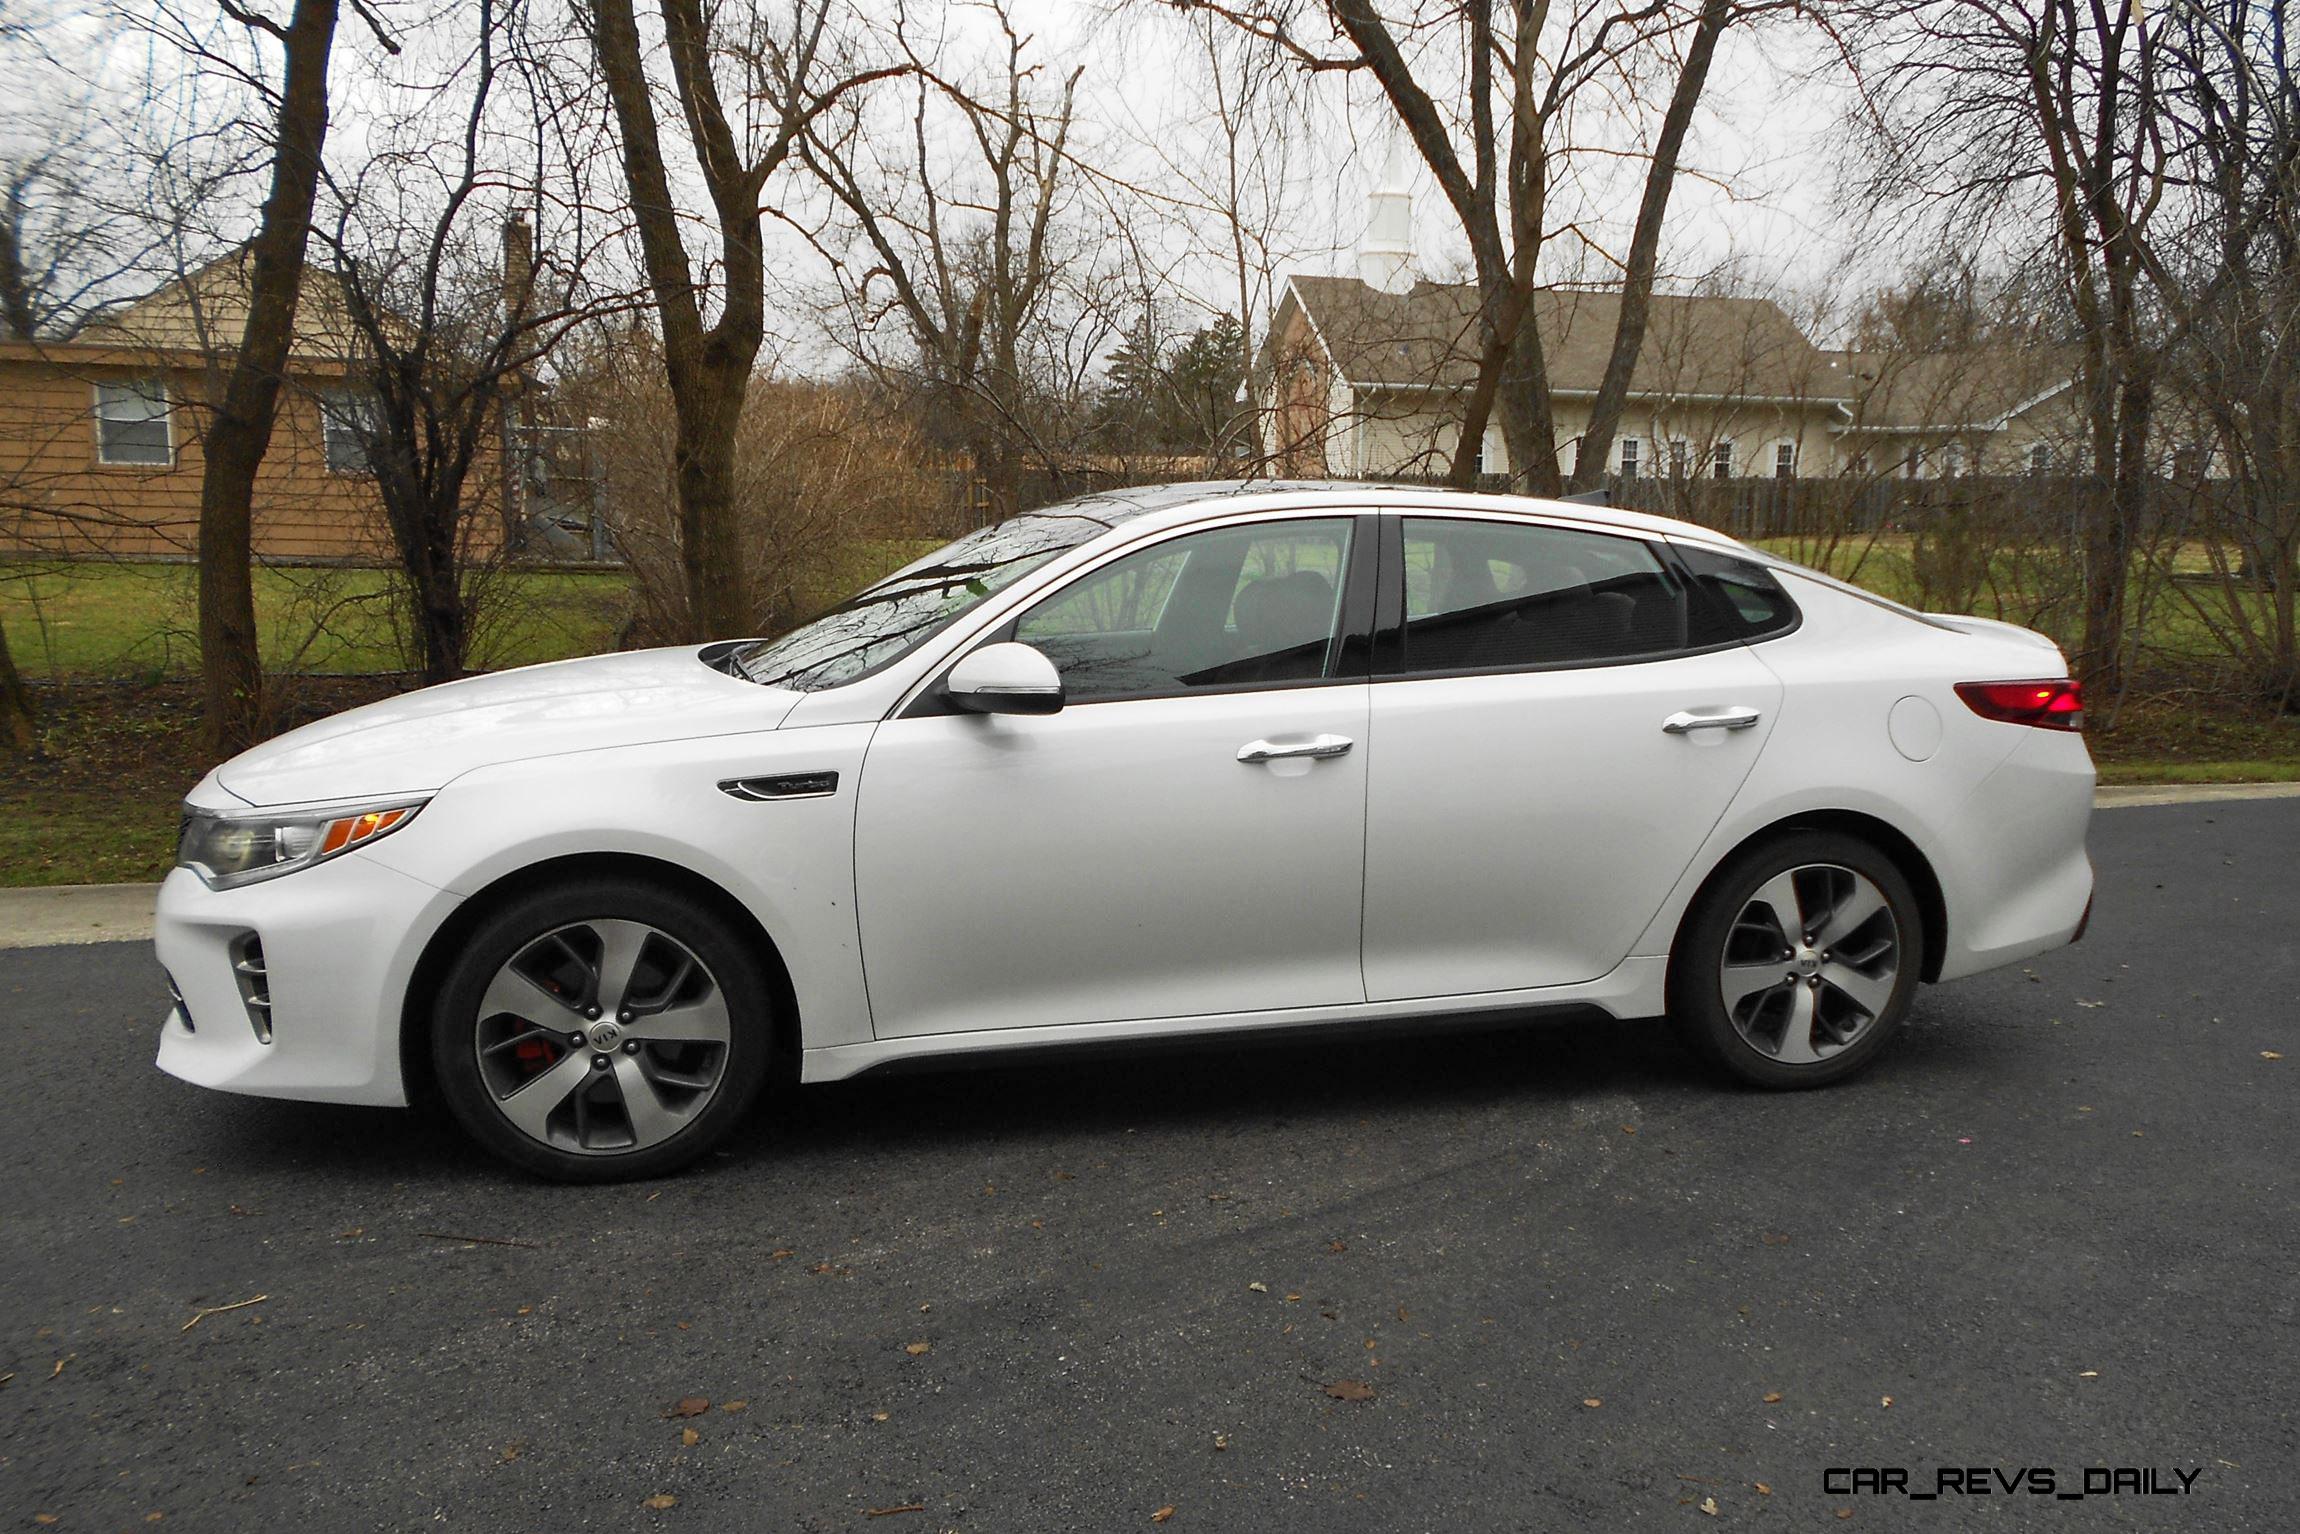 First Drive Review 2016 Kia Optima Sx 20t By Ben Lewis